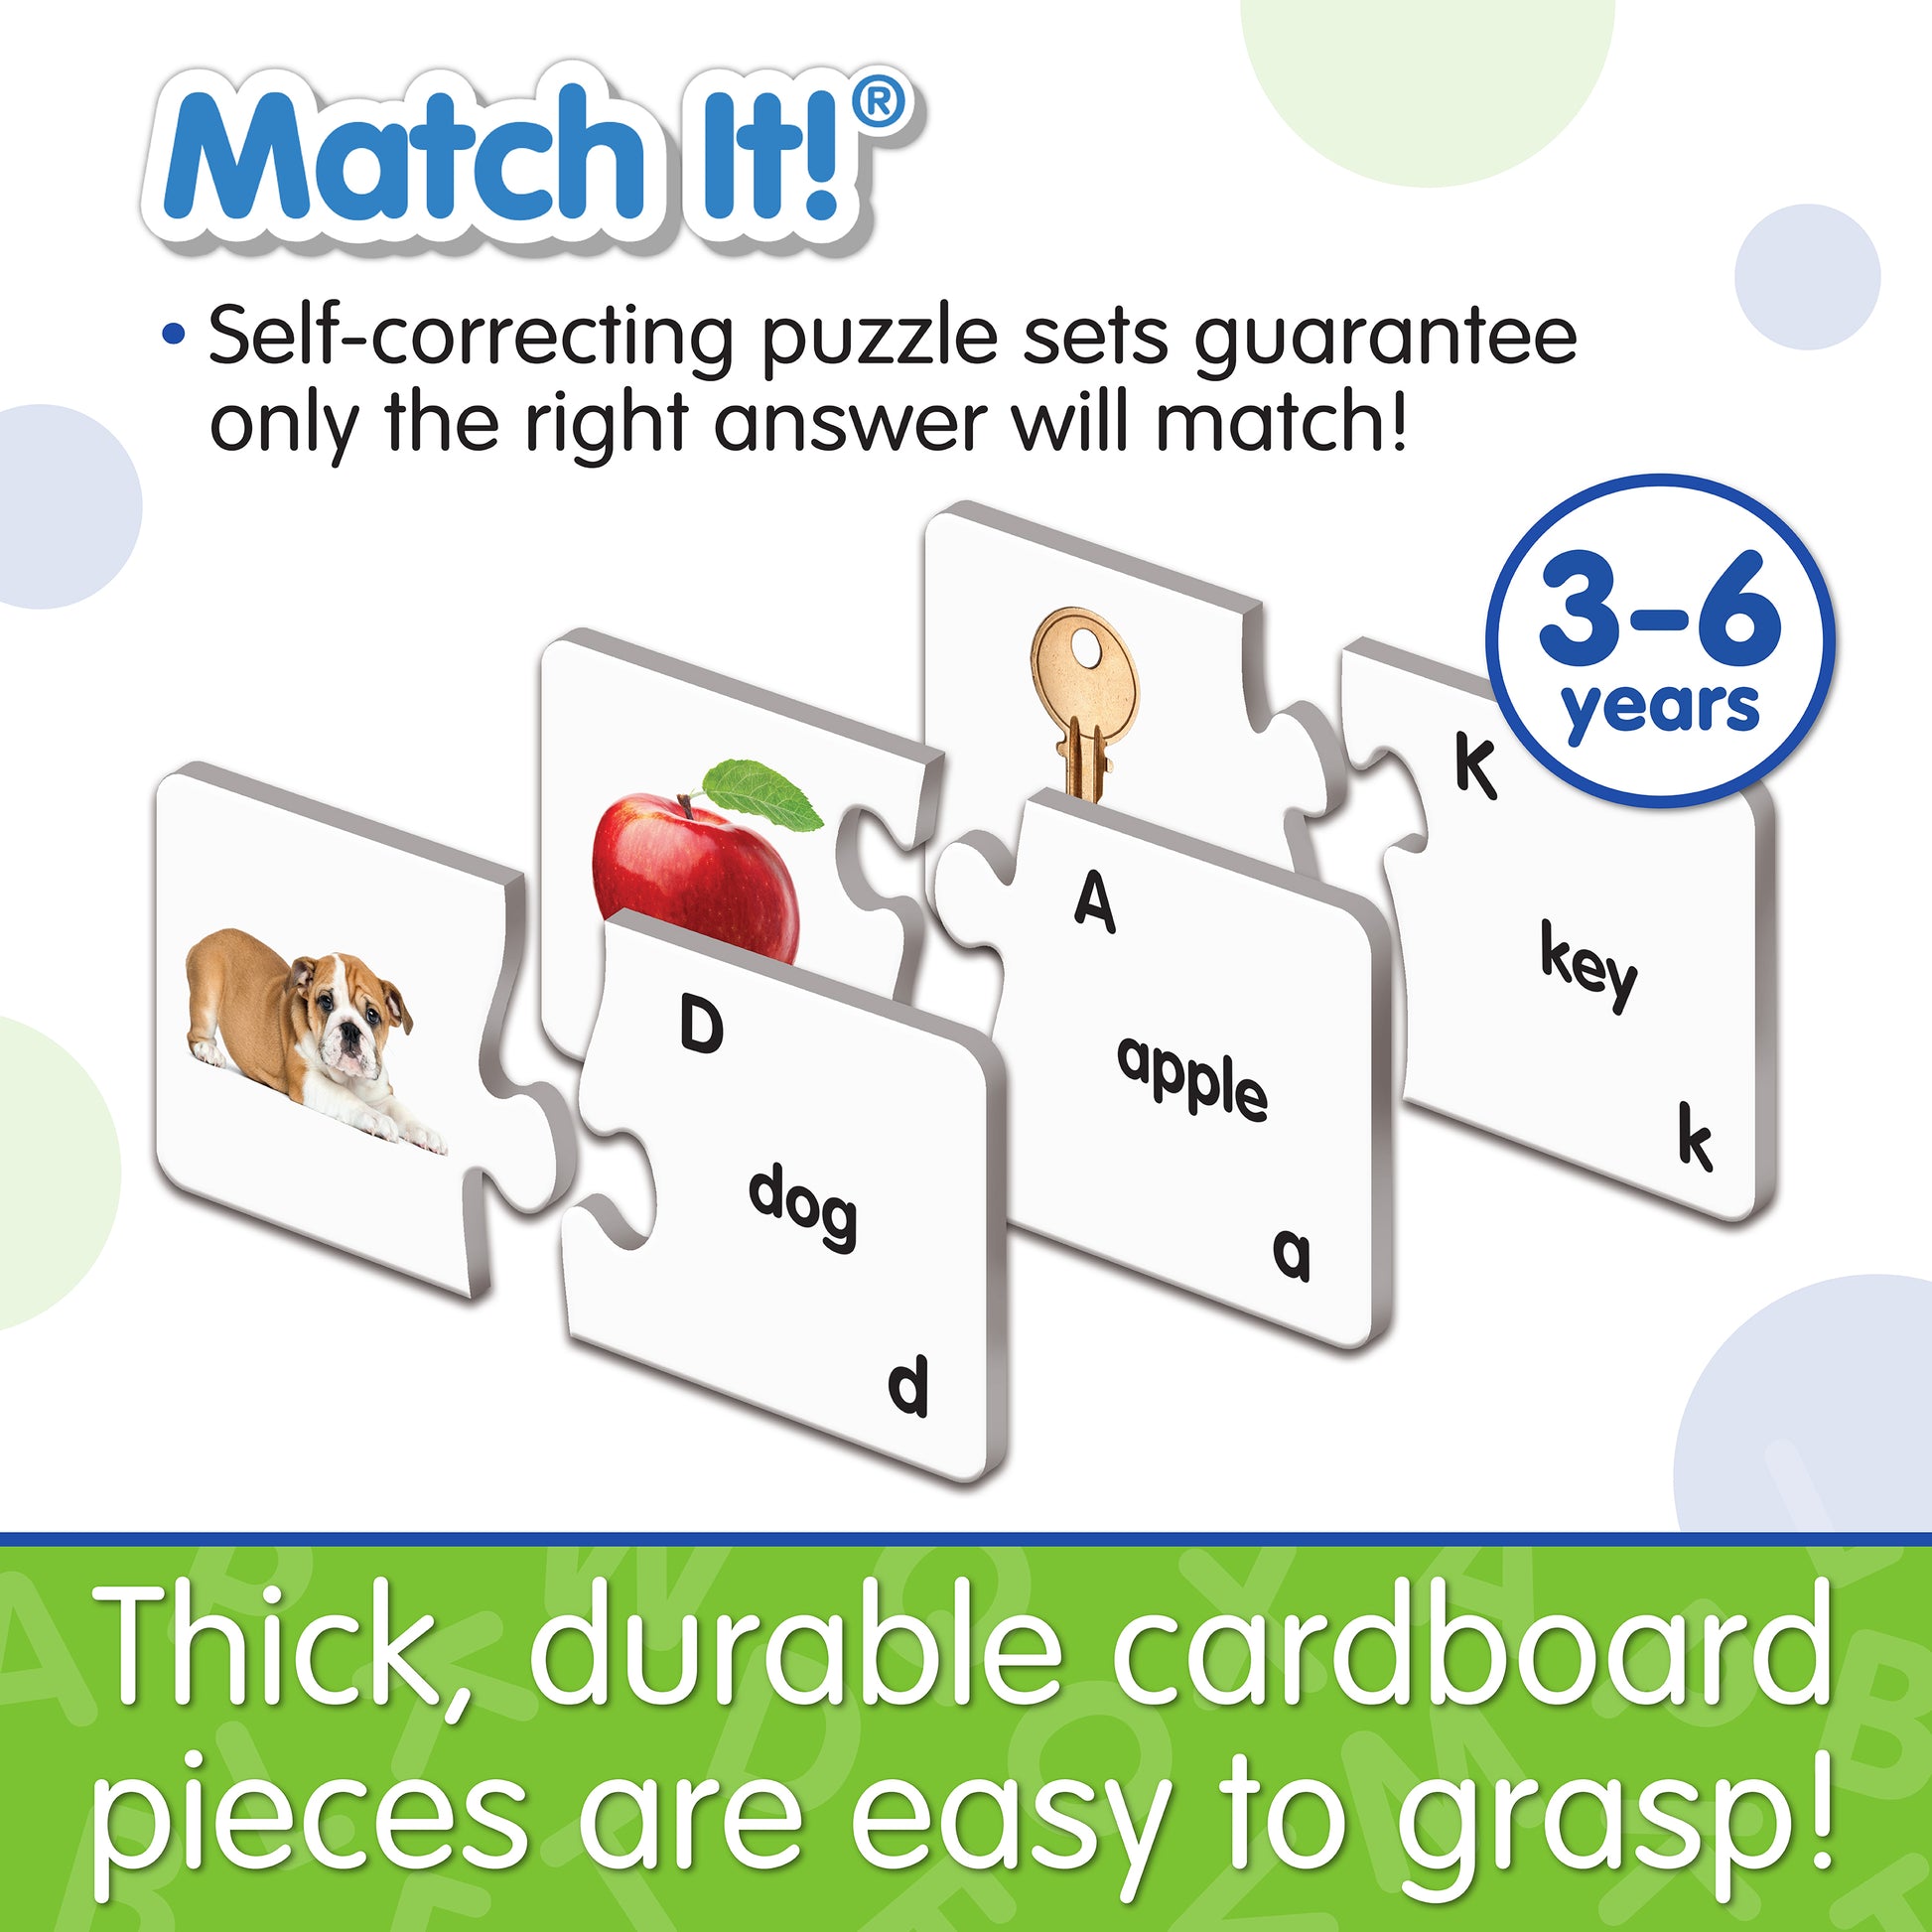 Infographic about Match It - ABC's features that says, "Thick, durable cardboard pieces are easy to grasp!"